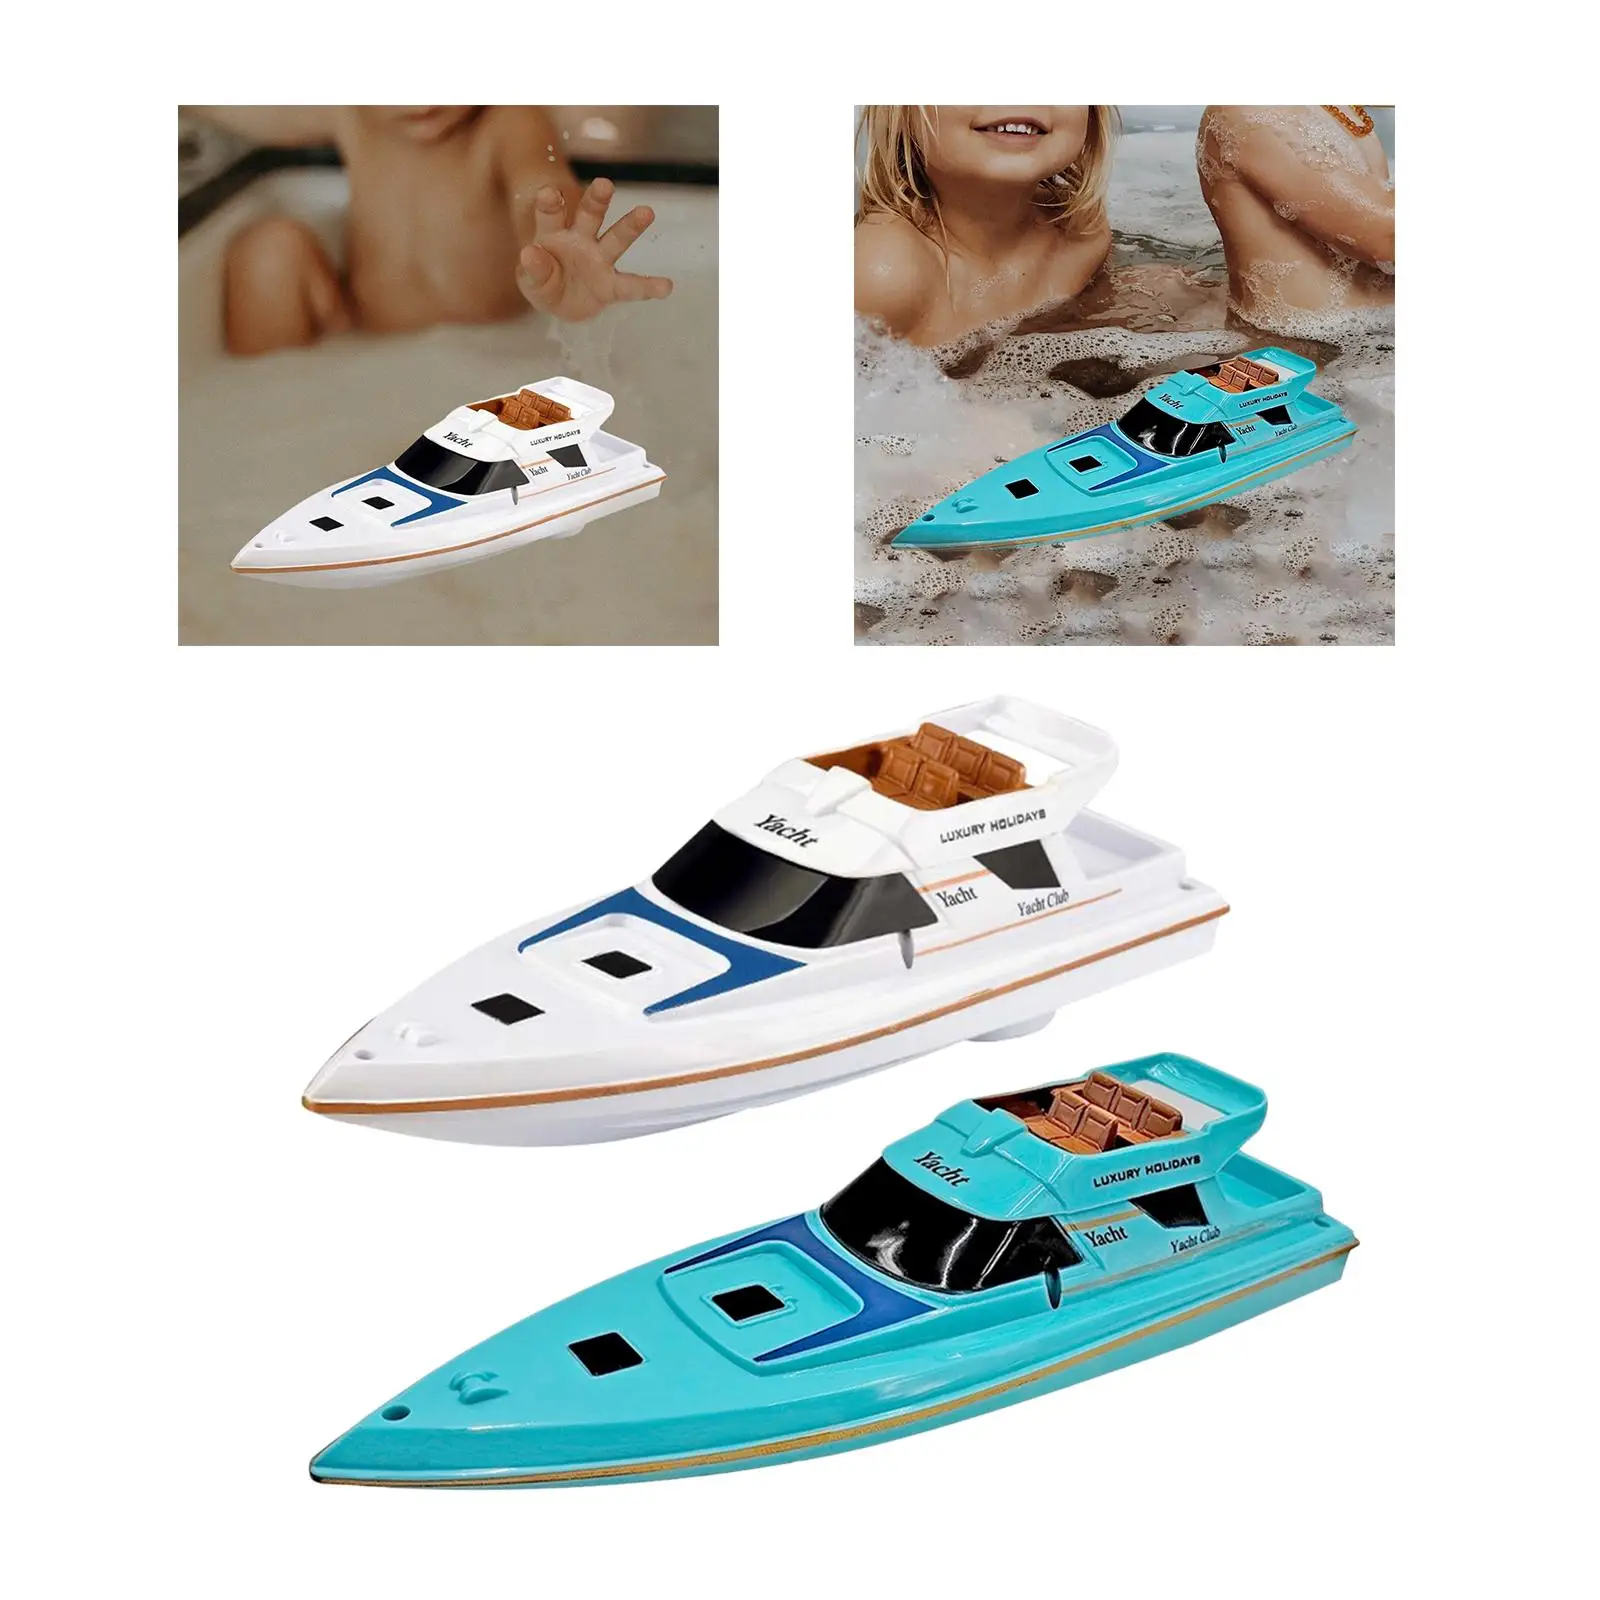 Electric Speed Boat Waterproof Electric Motor Boat for Ponds Bathroom River